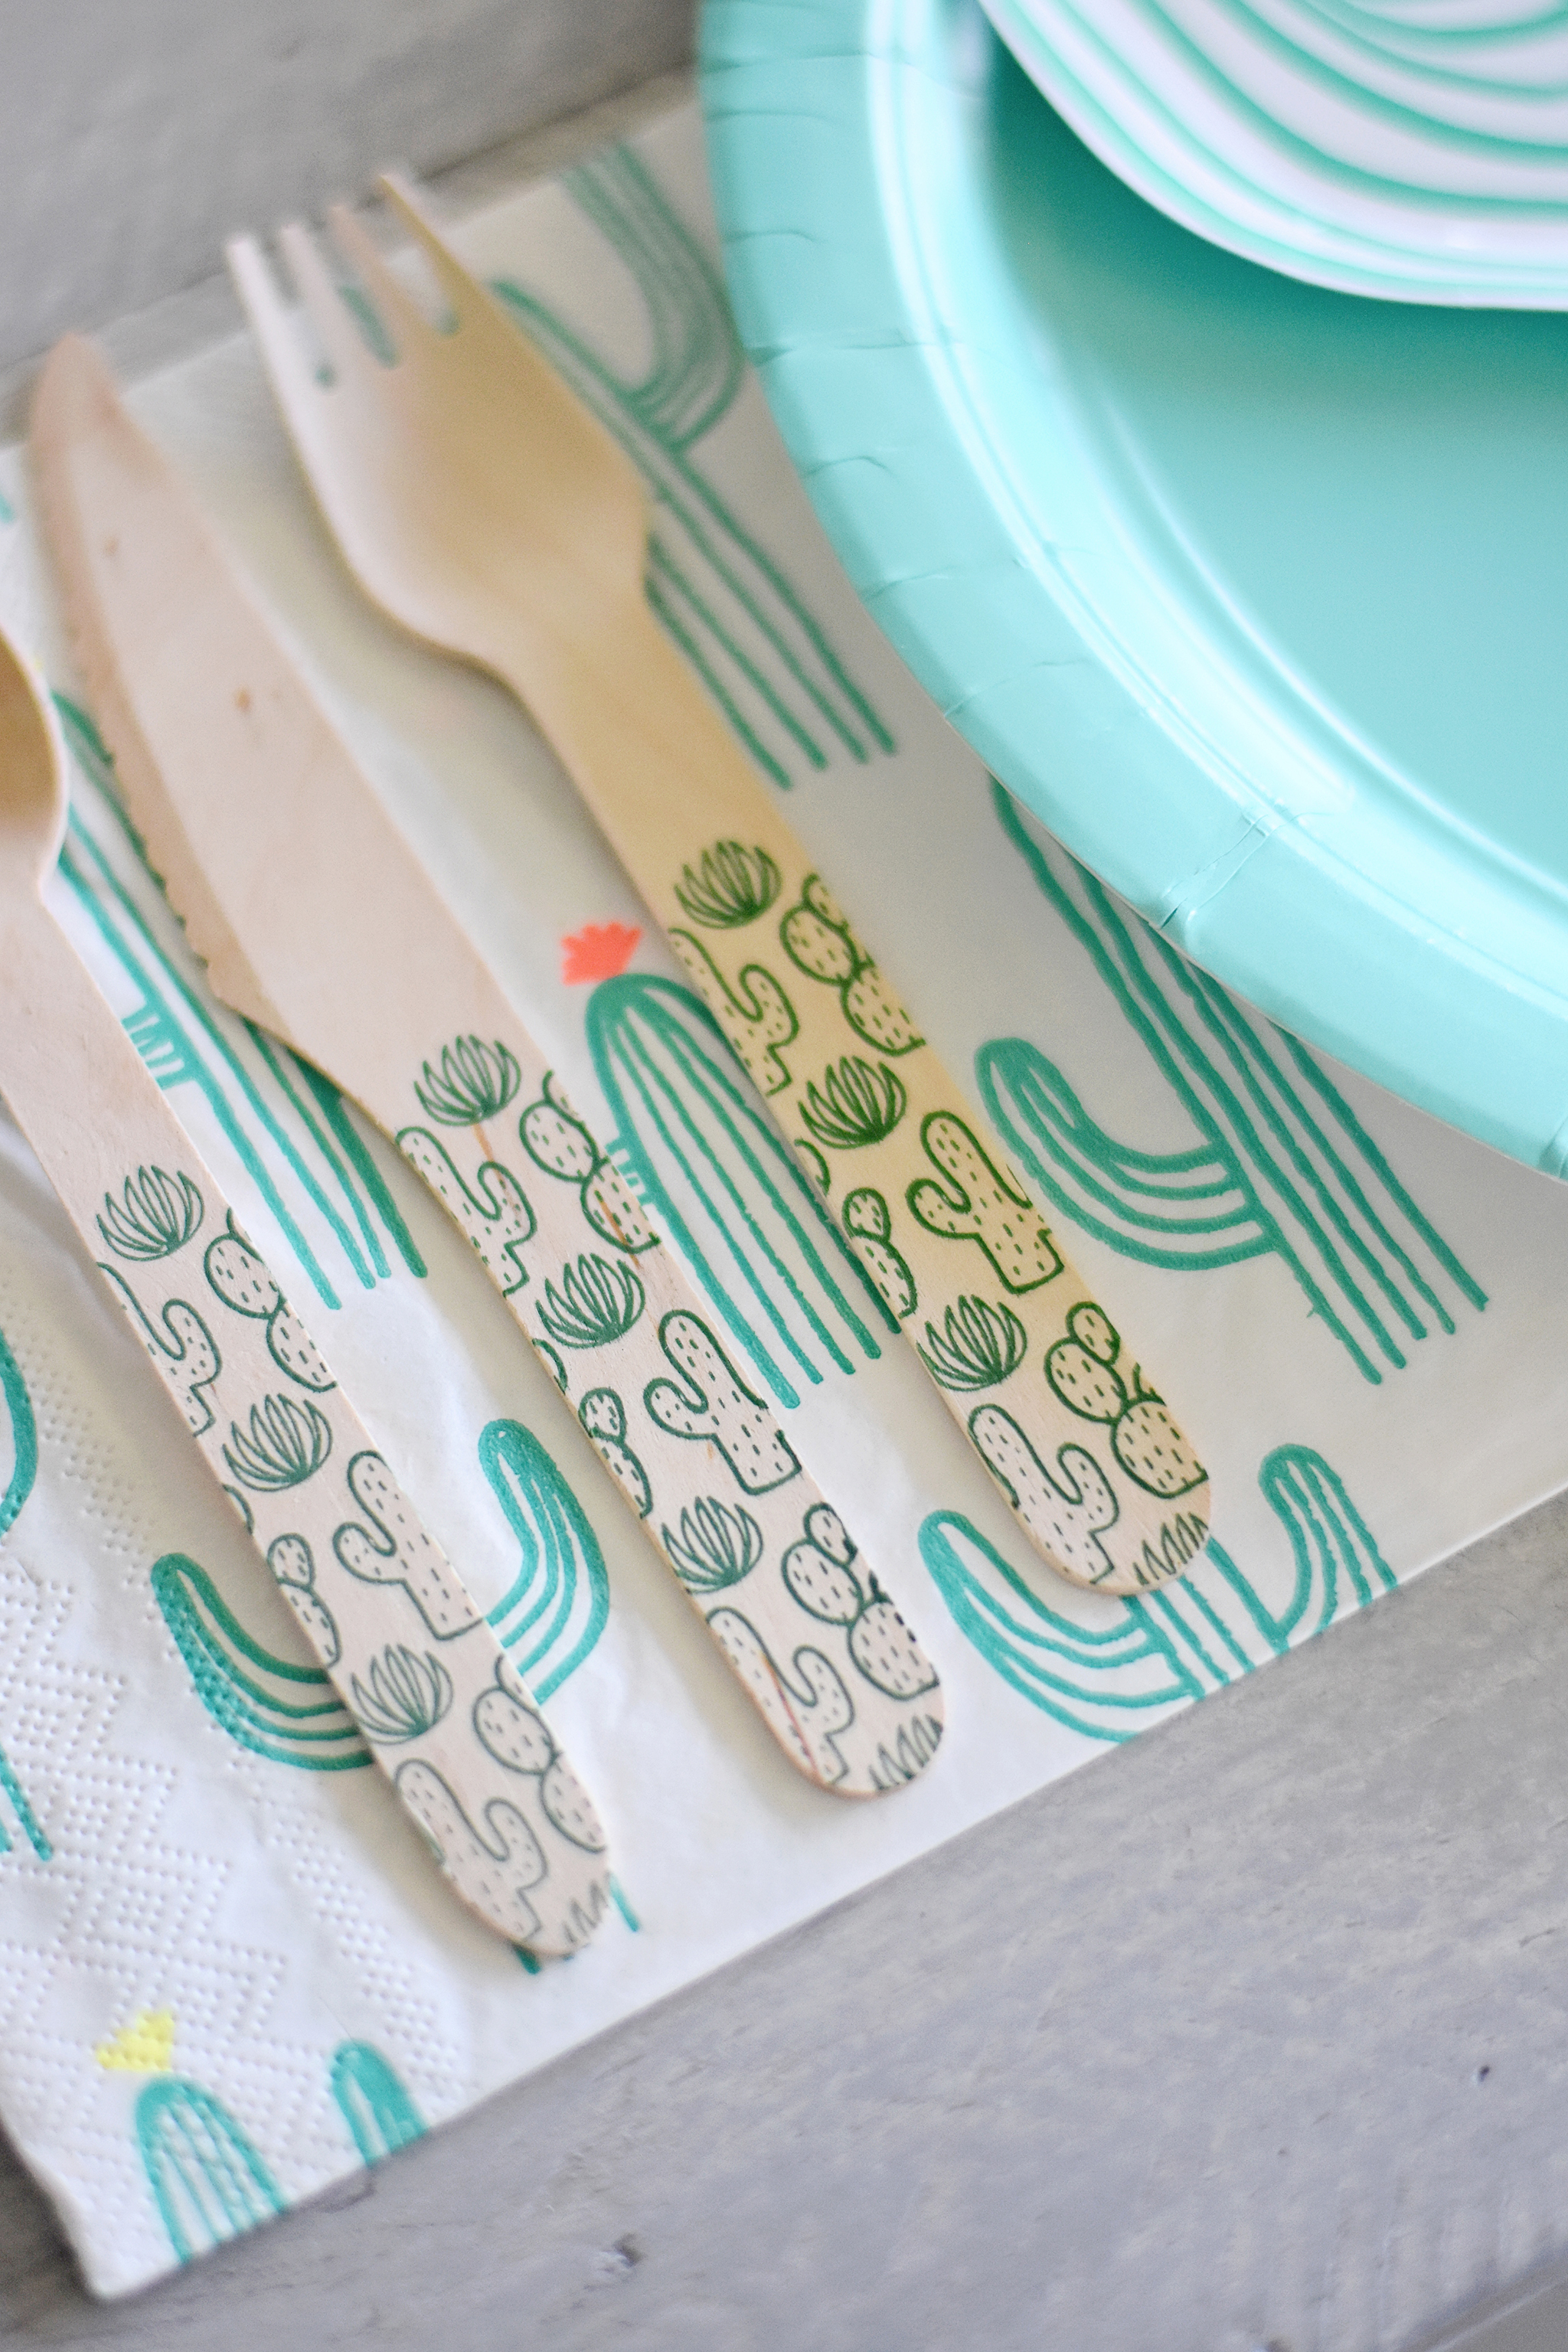 Cacti Print Flatware from Sucre Shop!